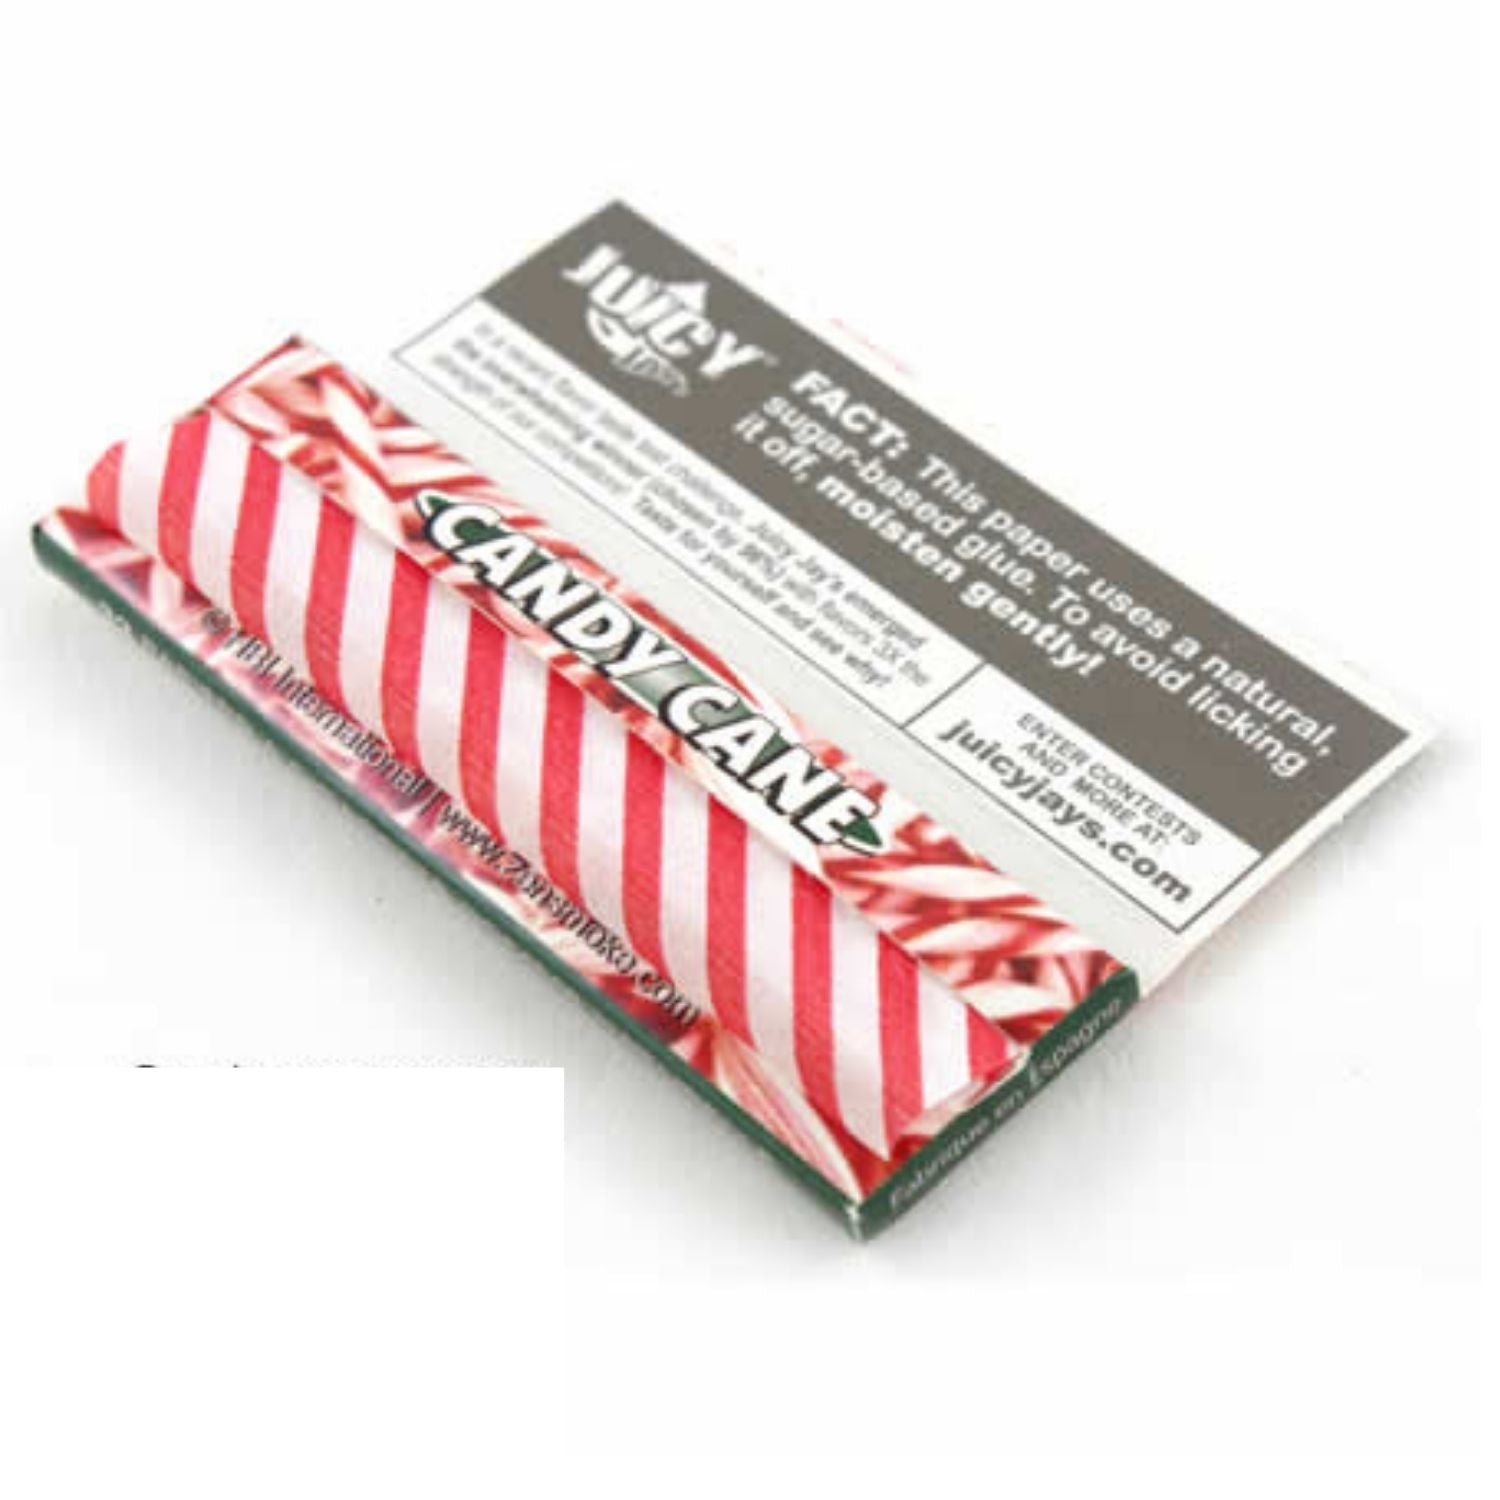 Juicy Jay Rolling Papers - Candy Cane Flavor - 1 1/4